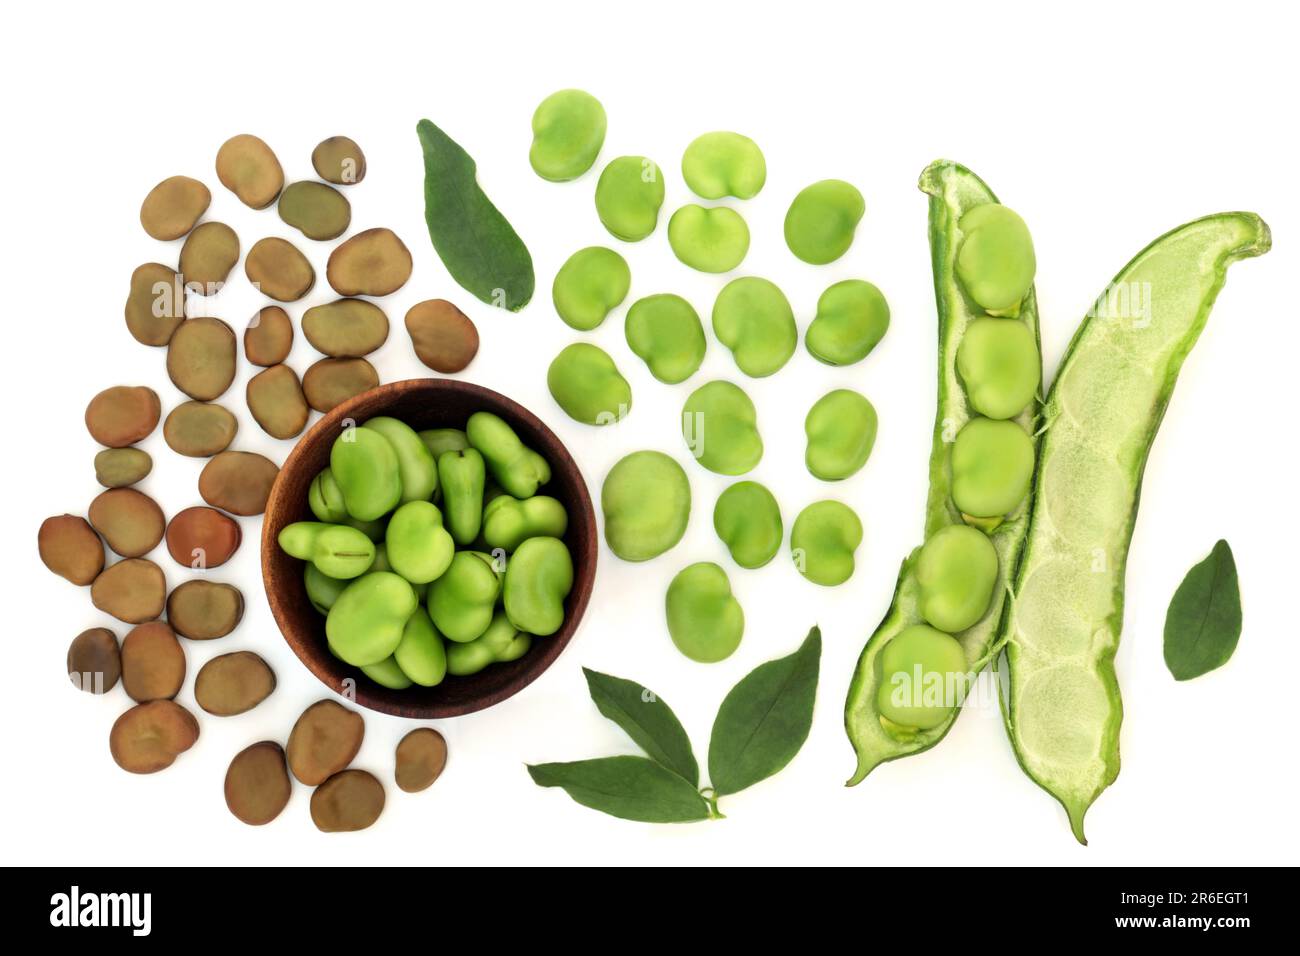 Broad bean legumes health food dried and fresh with leaves. High in protein, fibre, folate and B vitamins, can lower high cholesterol levels. On white Stock Photo